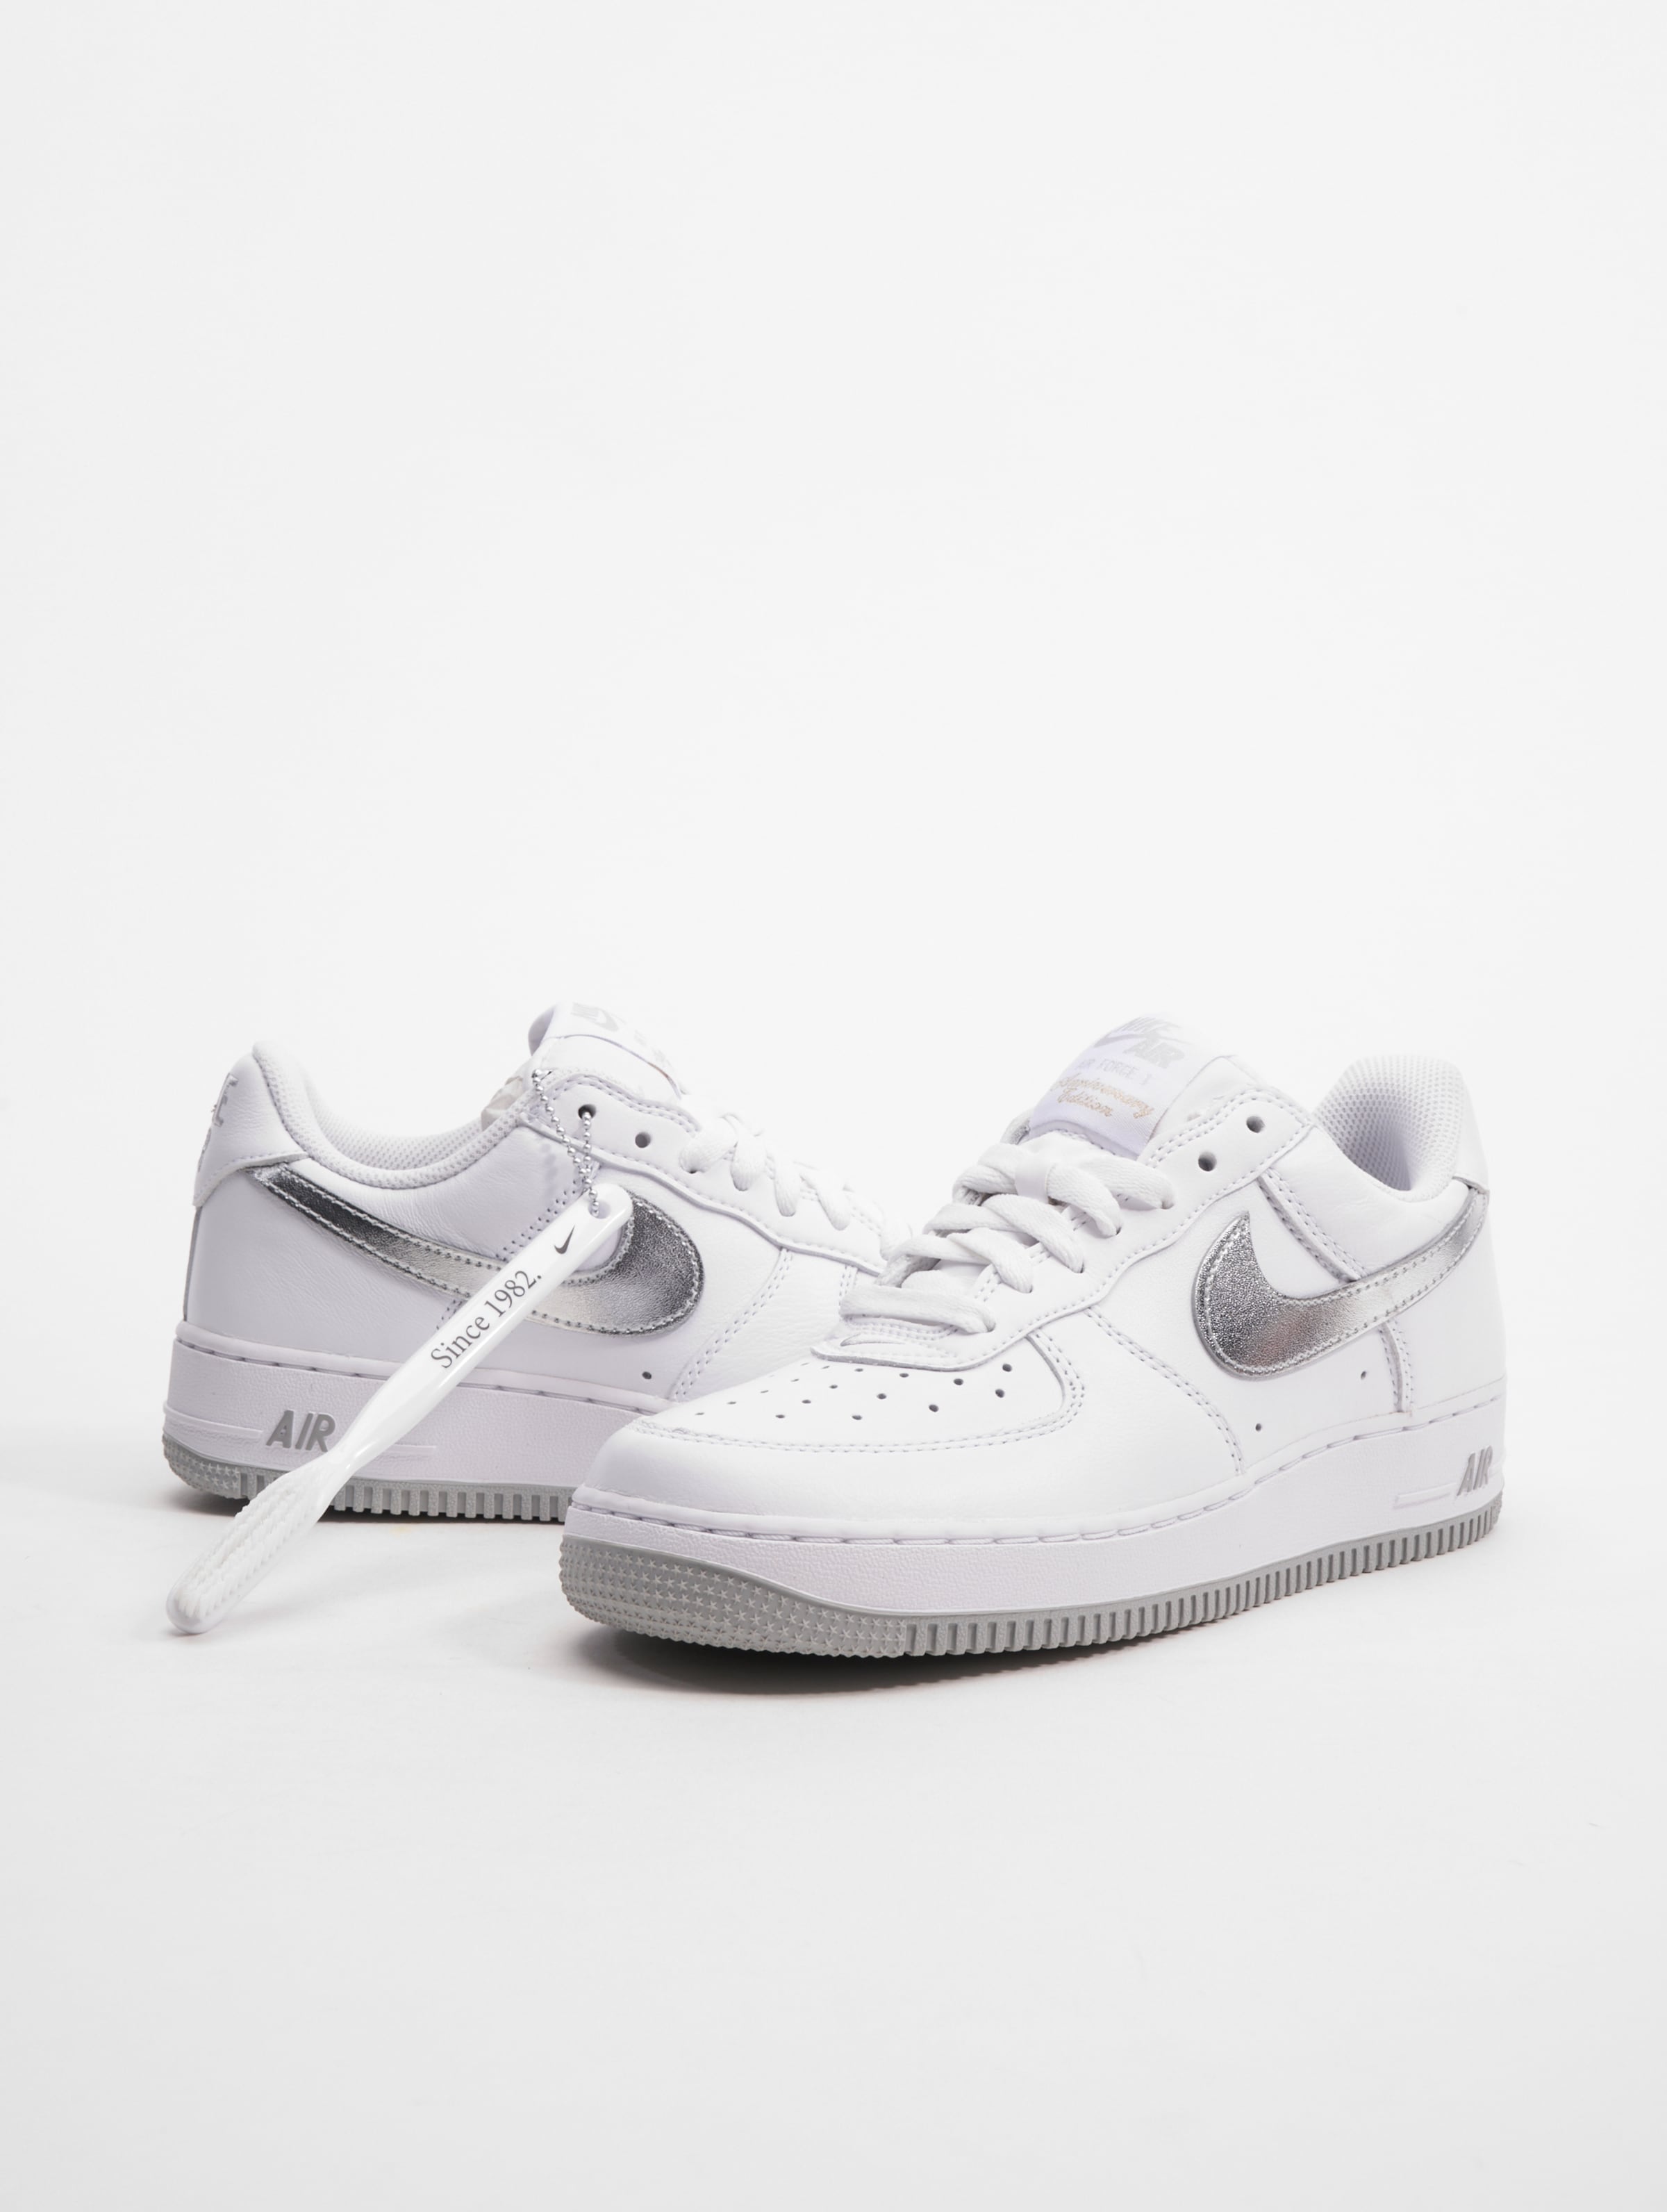 Nike Air Force 1 '07 Low Color of the Month White Metallic Silver DZ6755-100 Maat 40.5 WIT Schoenen